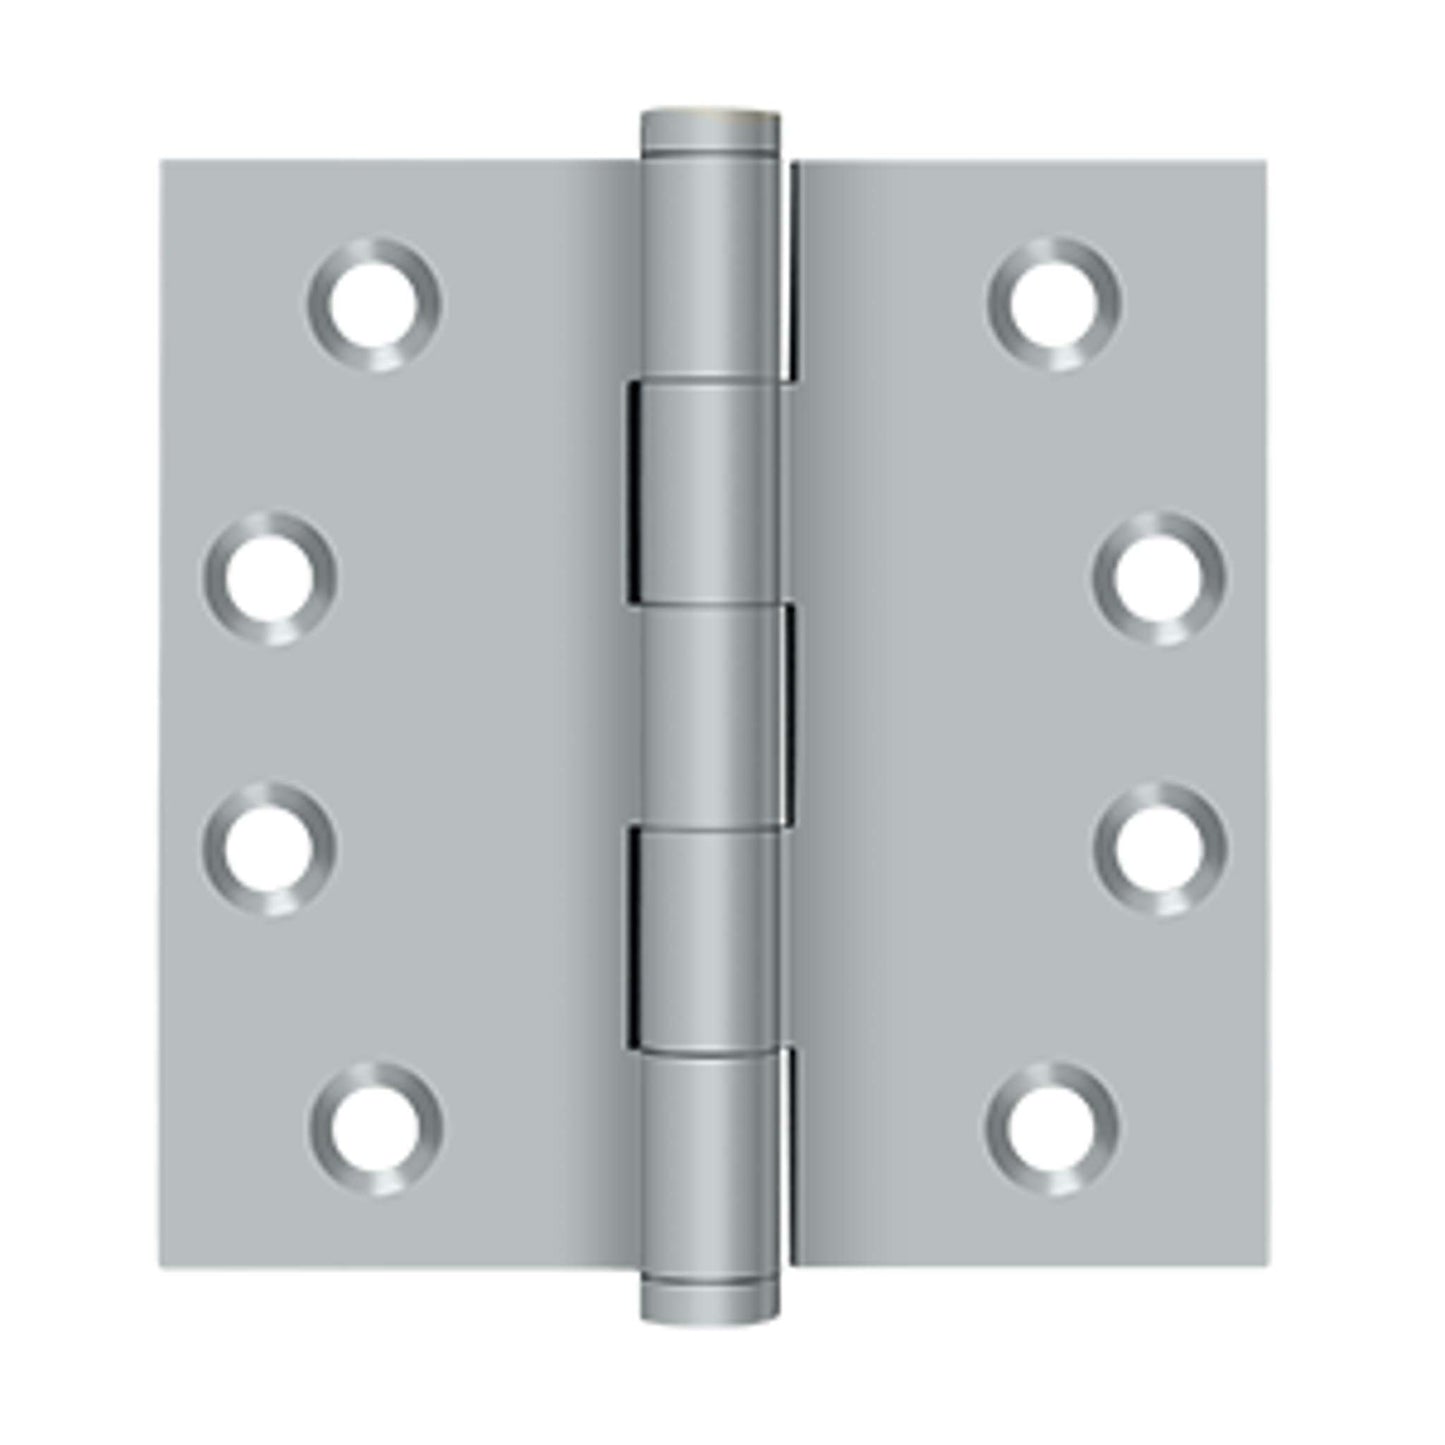 Deltana - 4" x 4" Square Hinges, Solid Brass Hinges